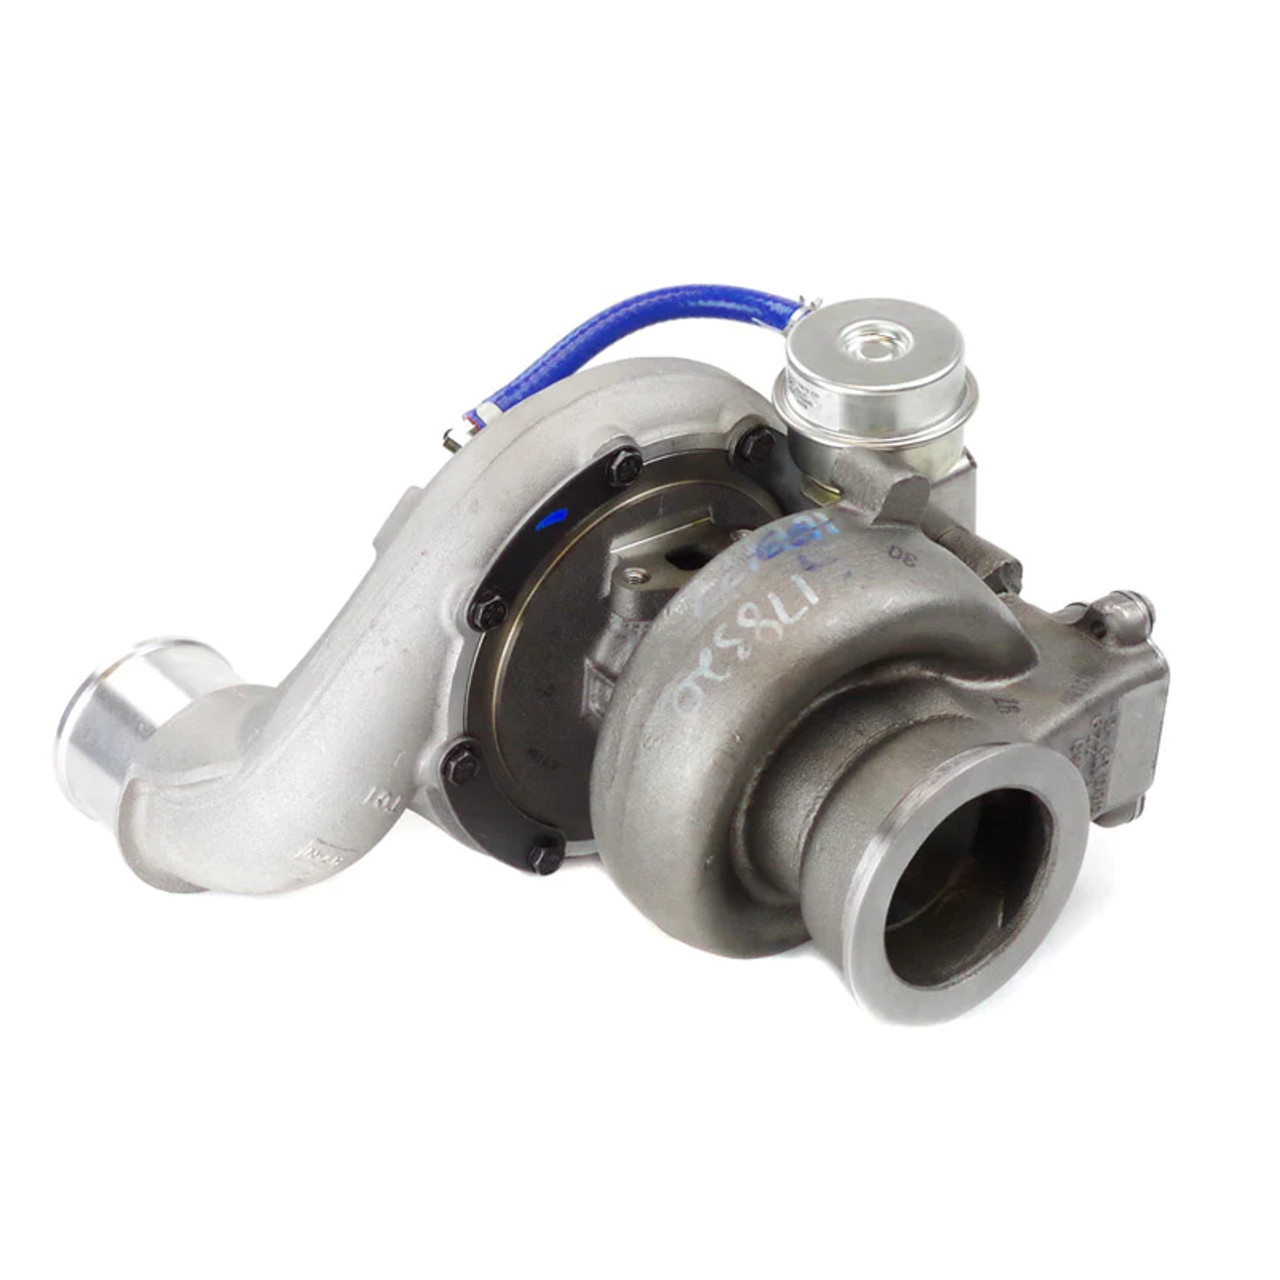  Industrial Injection Viper PhatShaft Turbo for 2004.5 to 2007 Dodge 5.9L Cummins - THat VIew